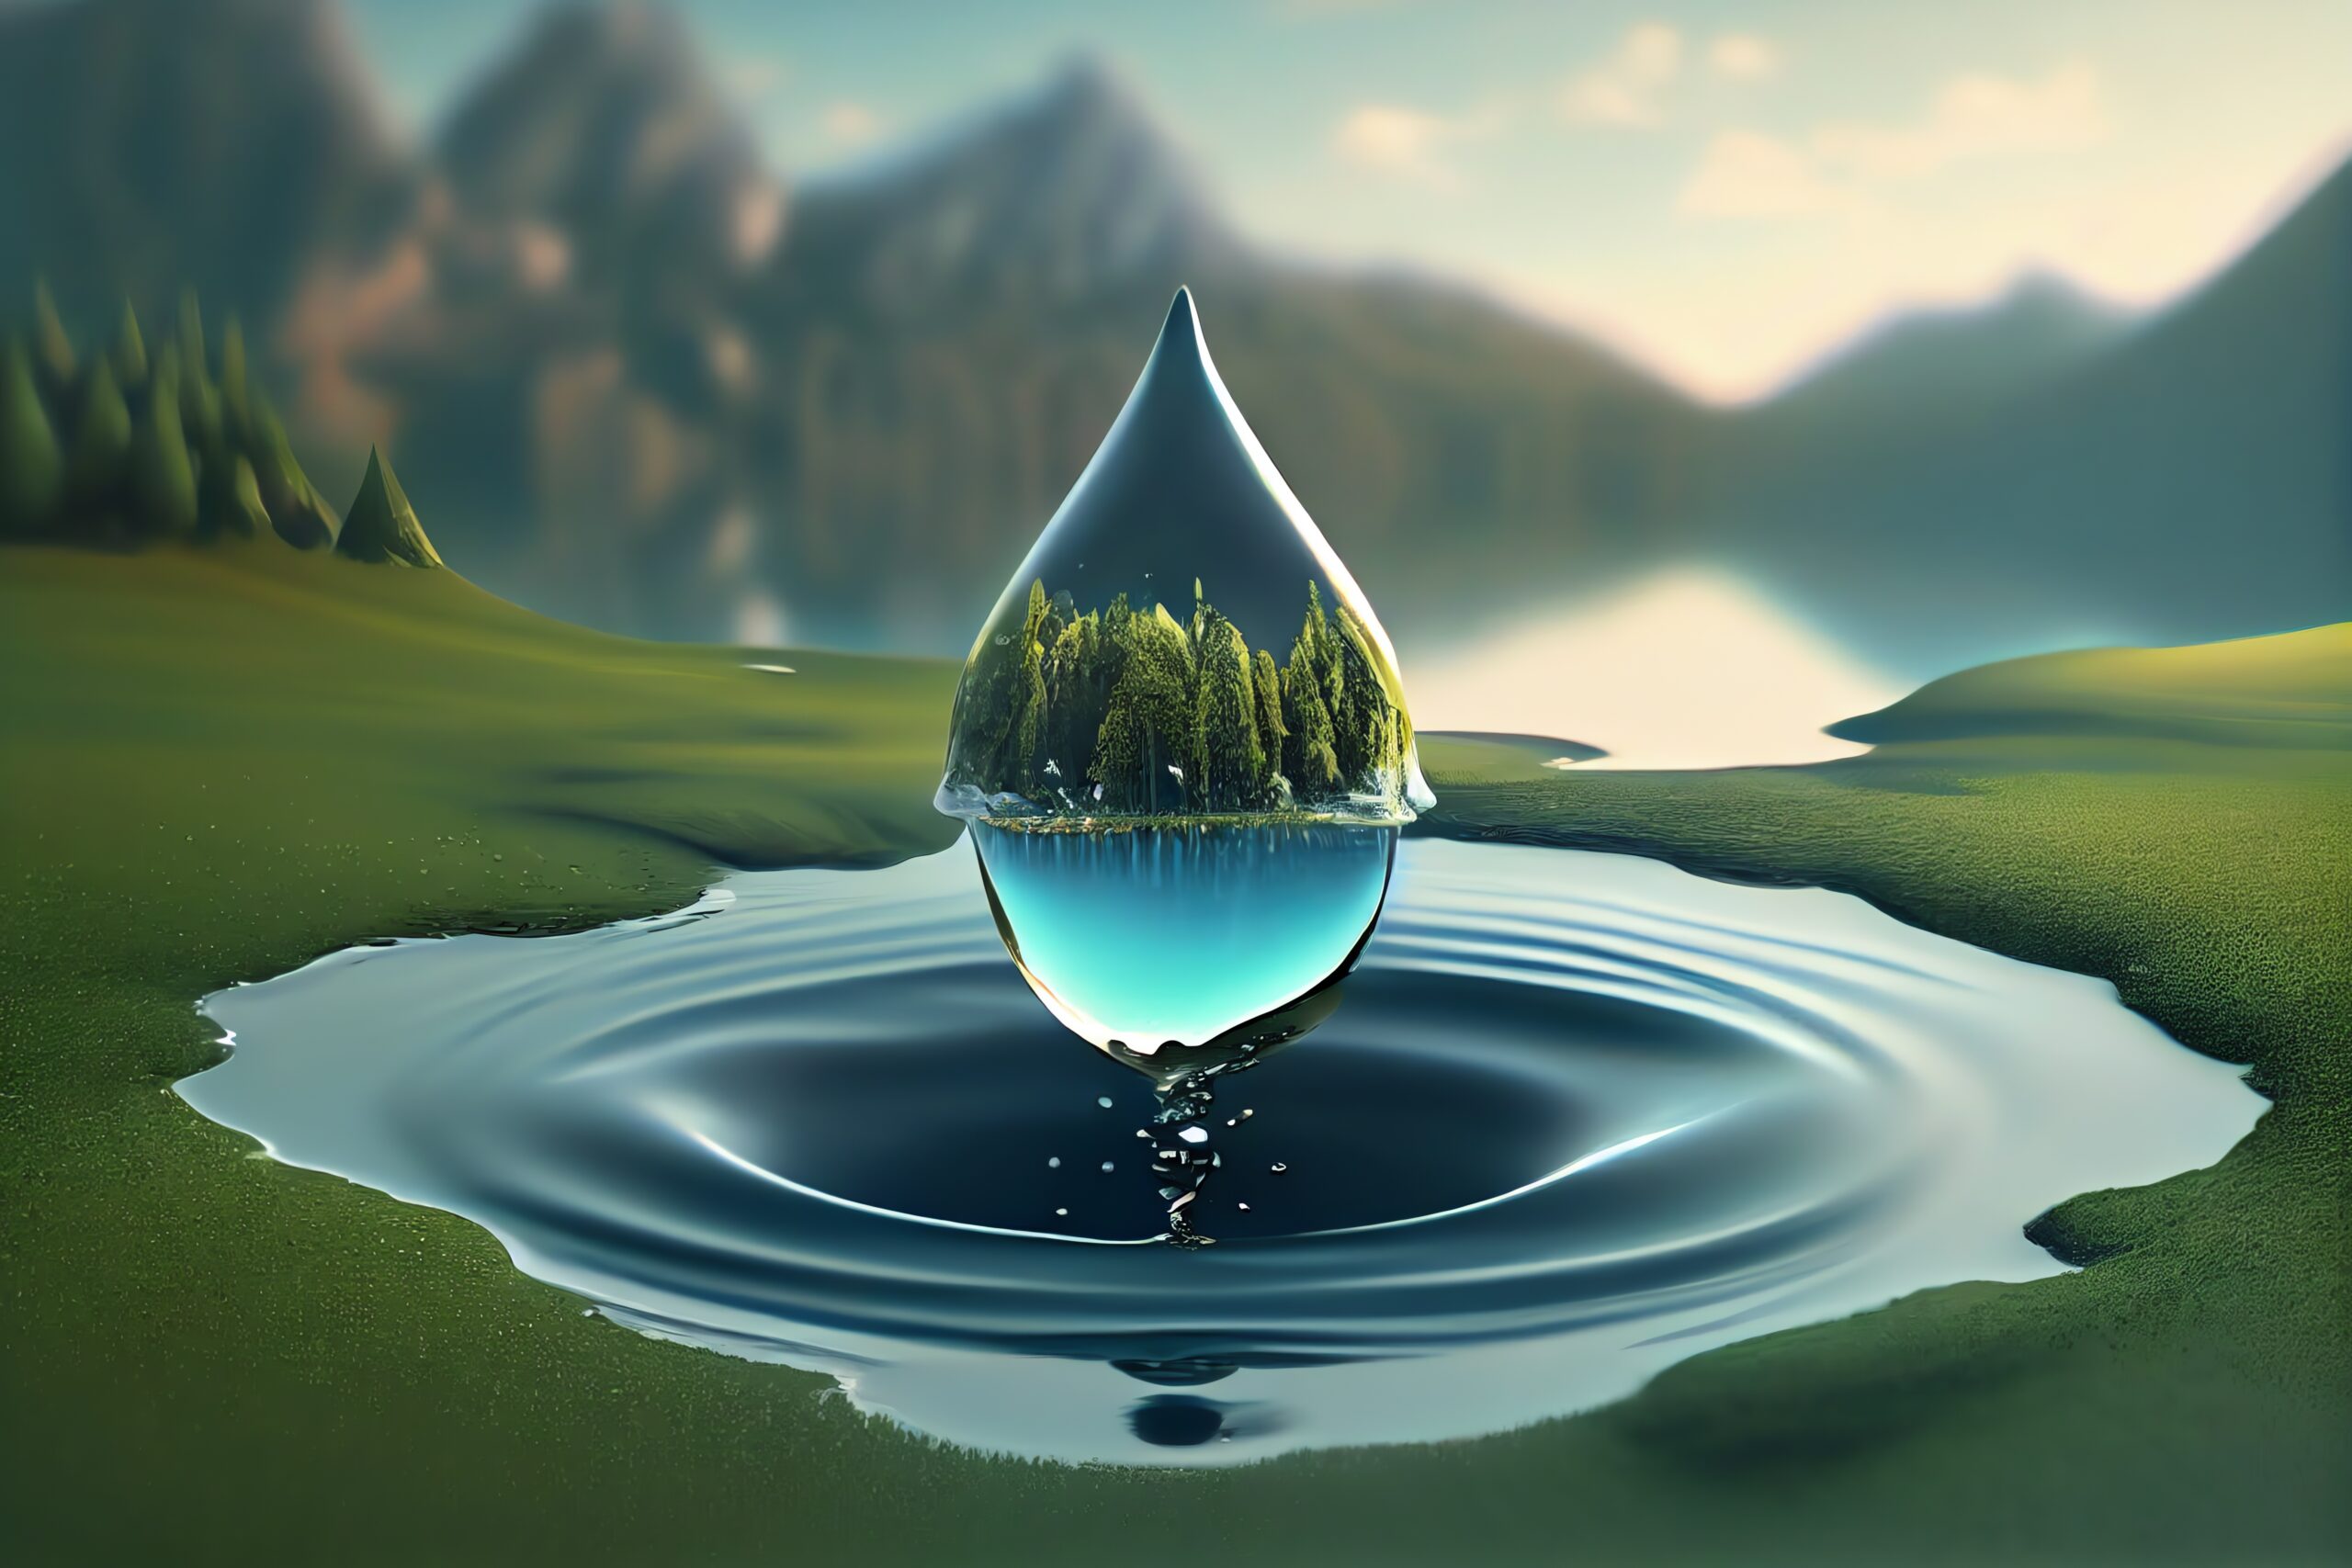 A water droplet shaped lake in the middle of untouched nature. A